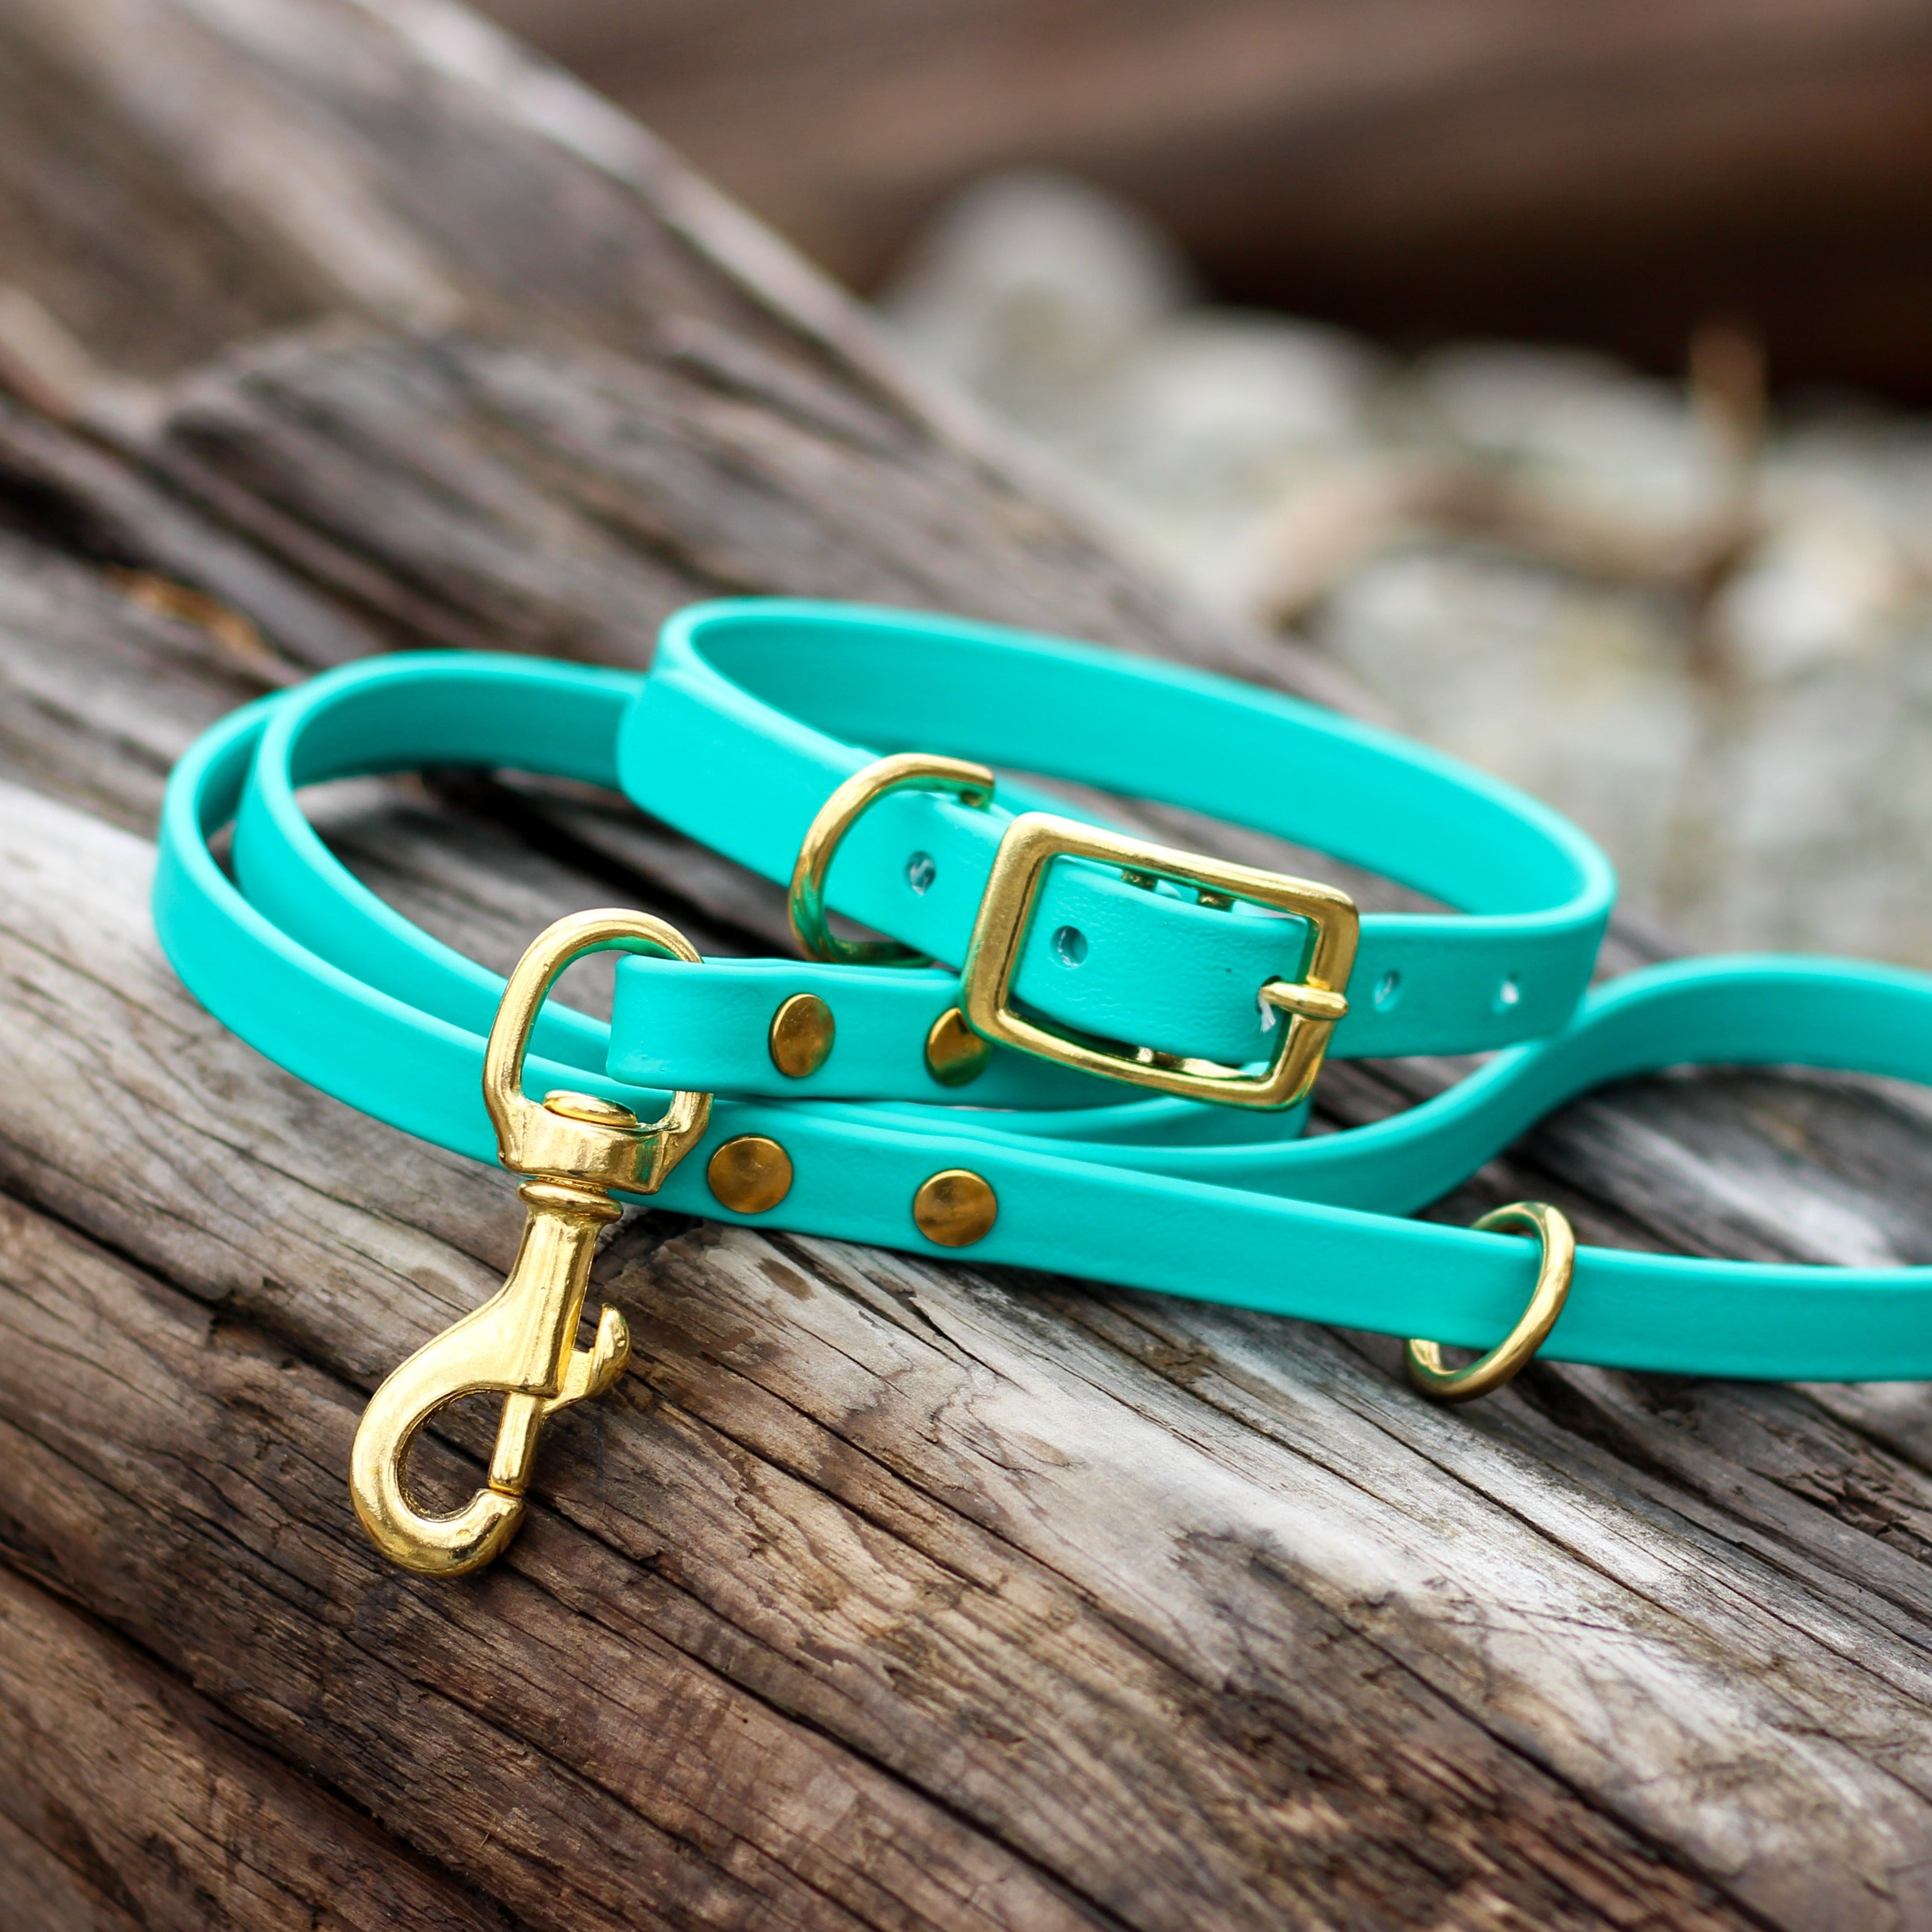 Teal Colored Waterproof Biothane Dog Collar and Leash